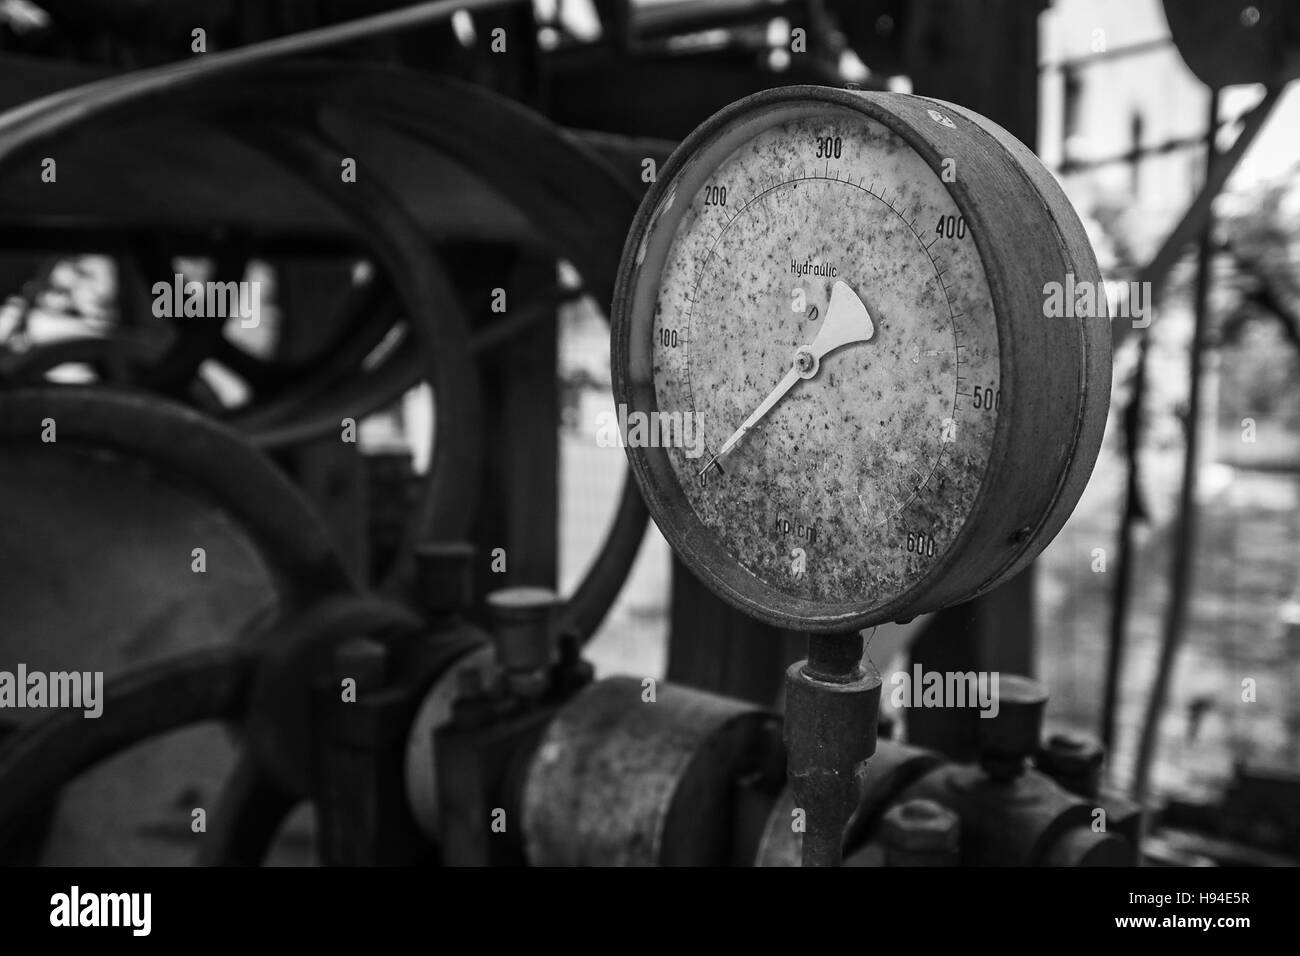 Rusty old pressure gauge in black and white. Stock Photo